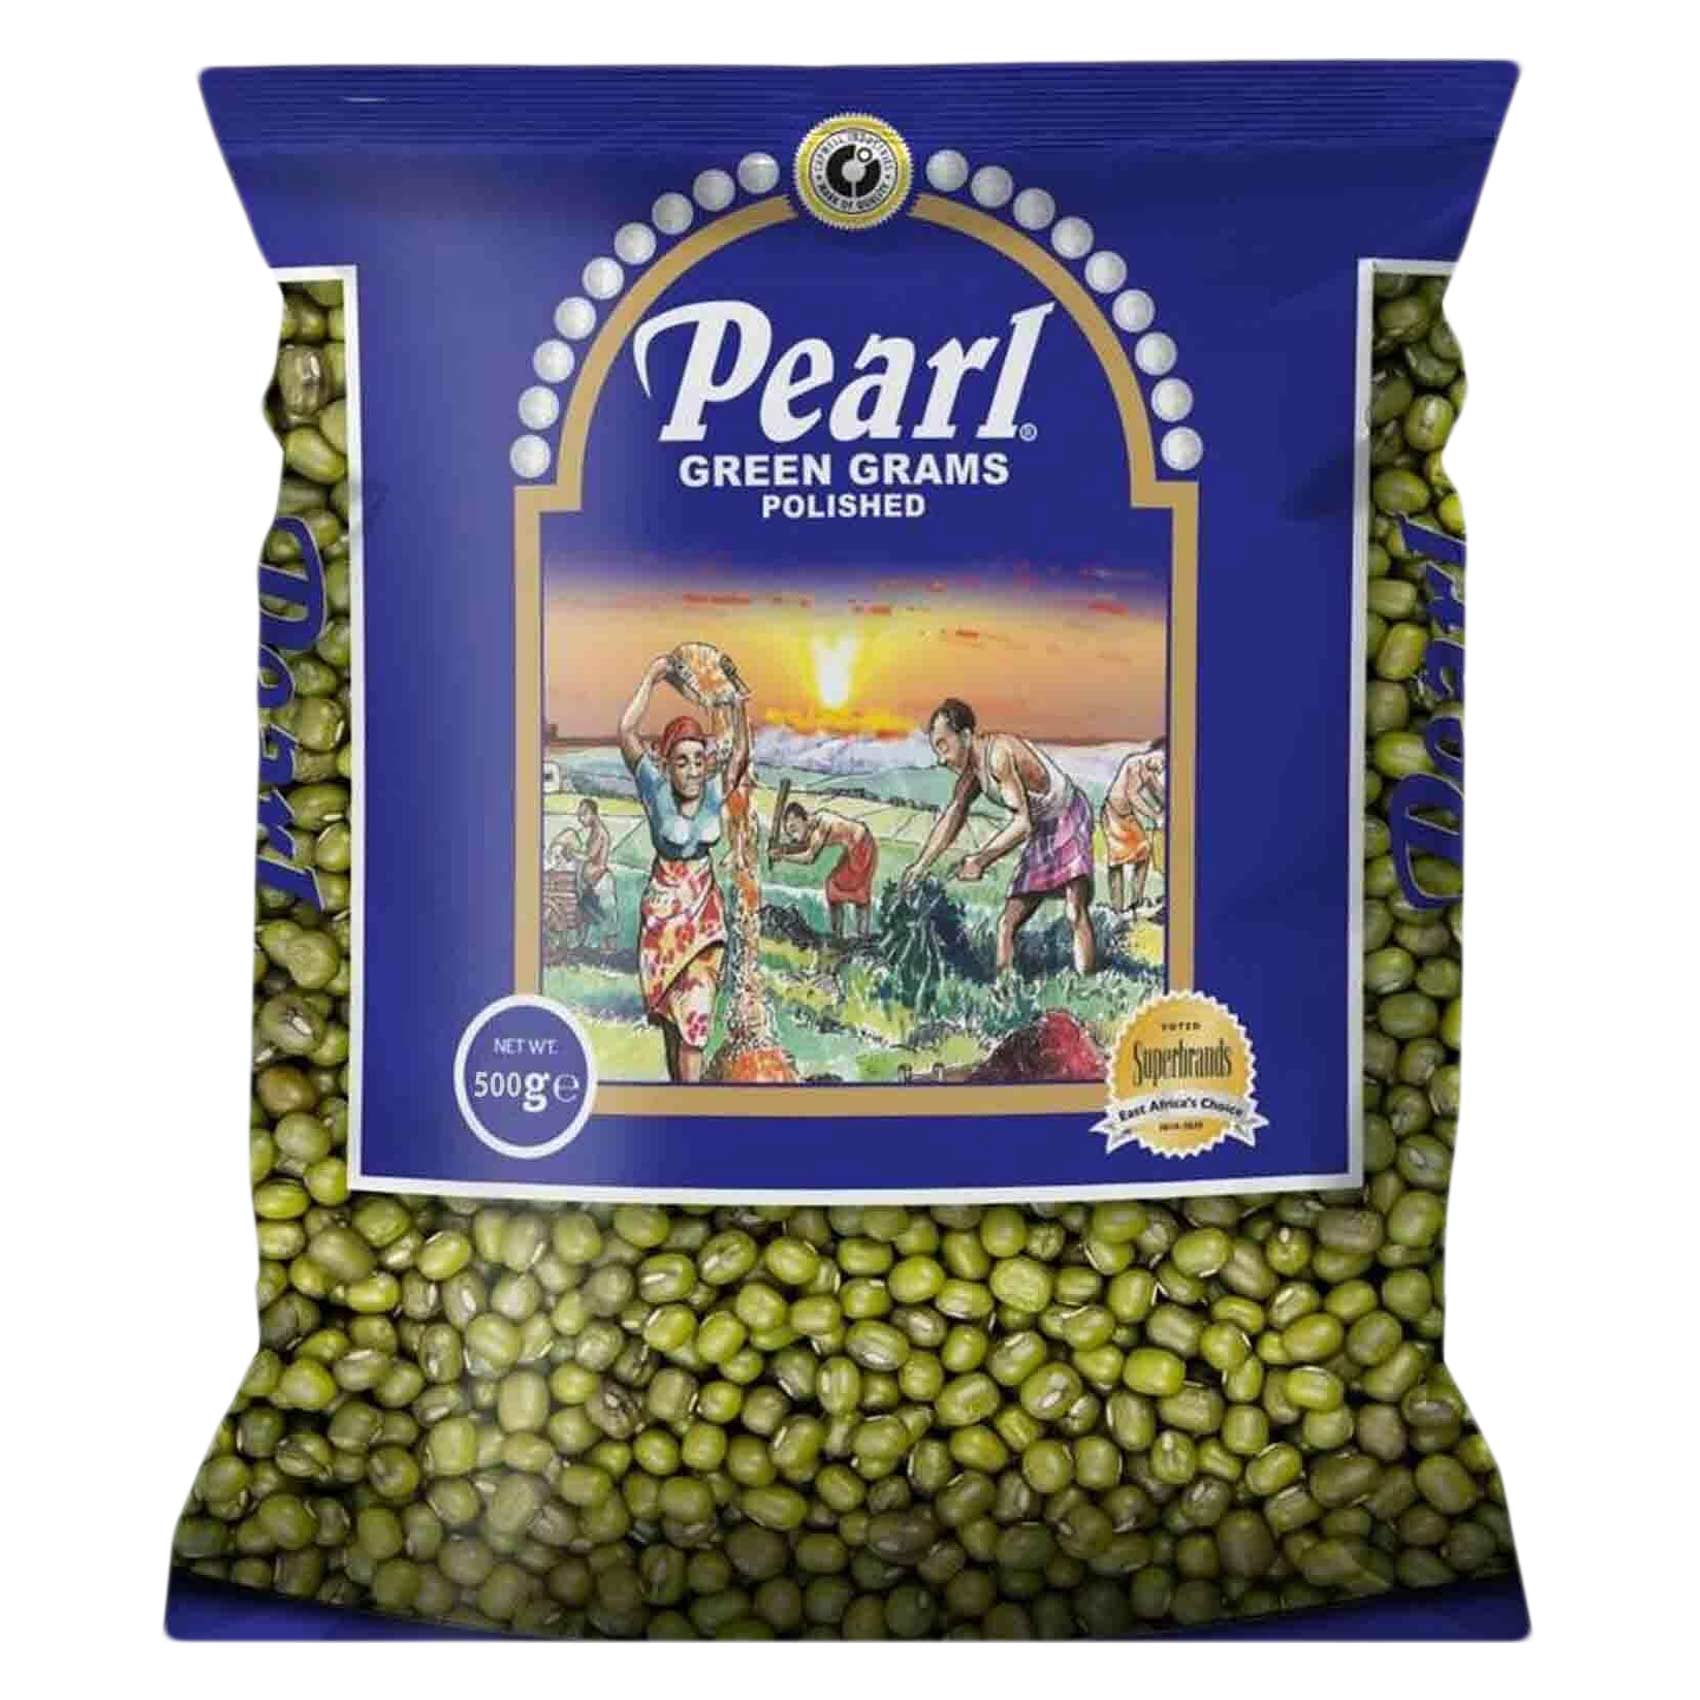 Pearl Polished Green Grams 500g